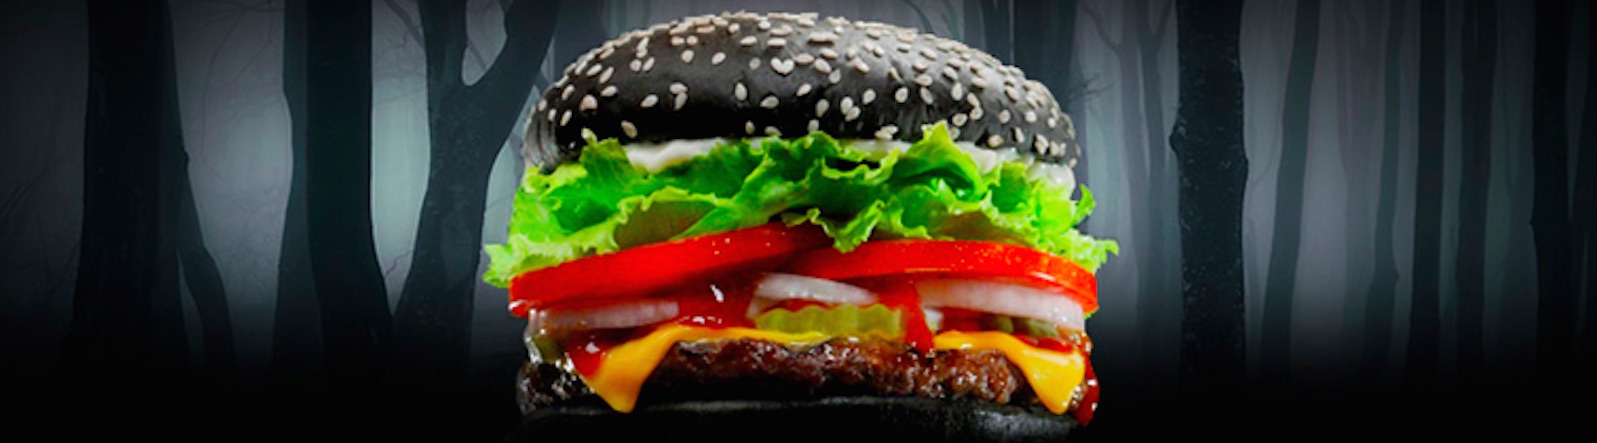 GreenPoop: Burger King's Halloween Whopper comes with an unexpected side  effect - Digiday